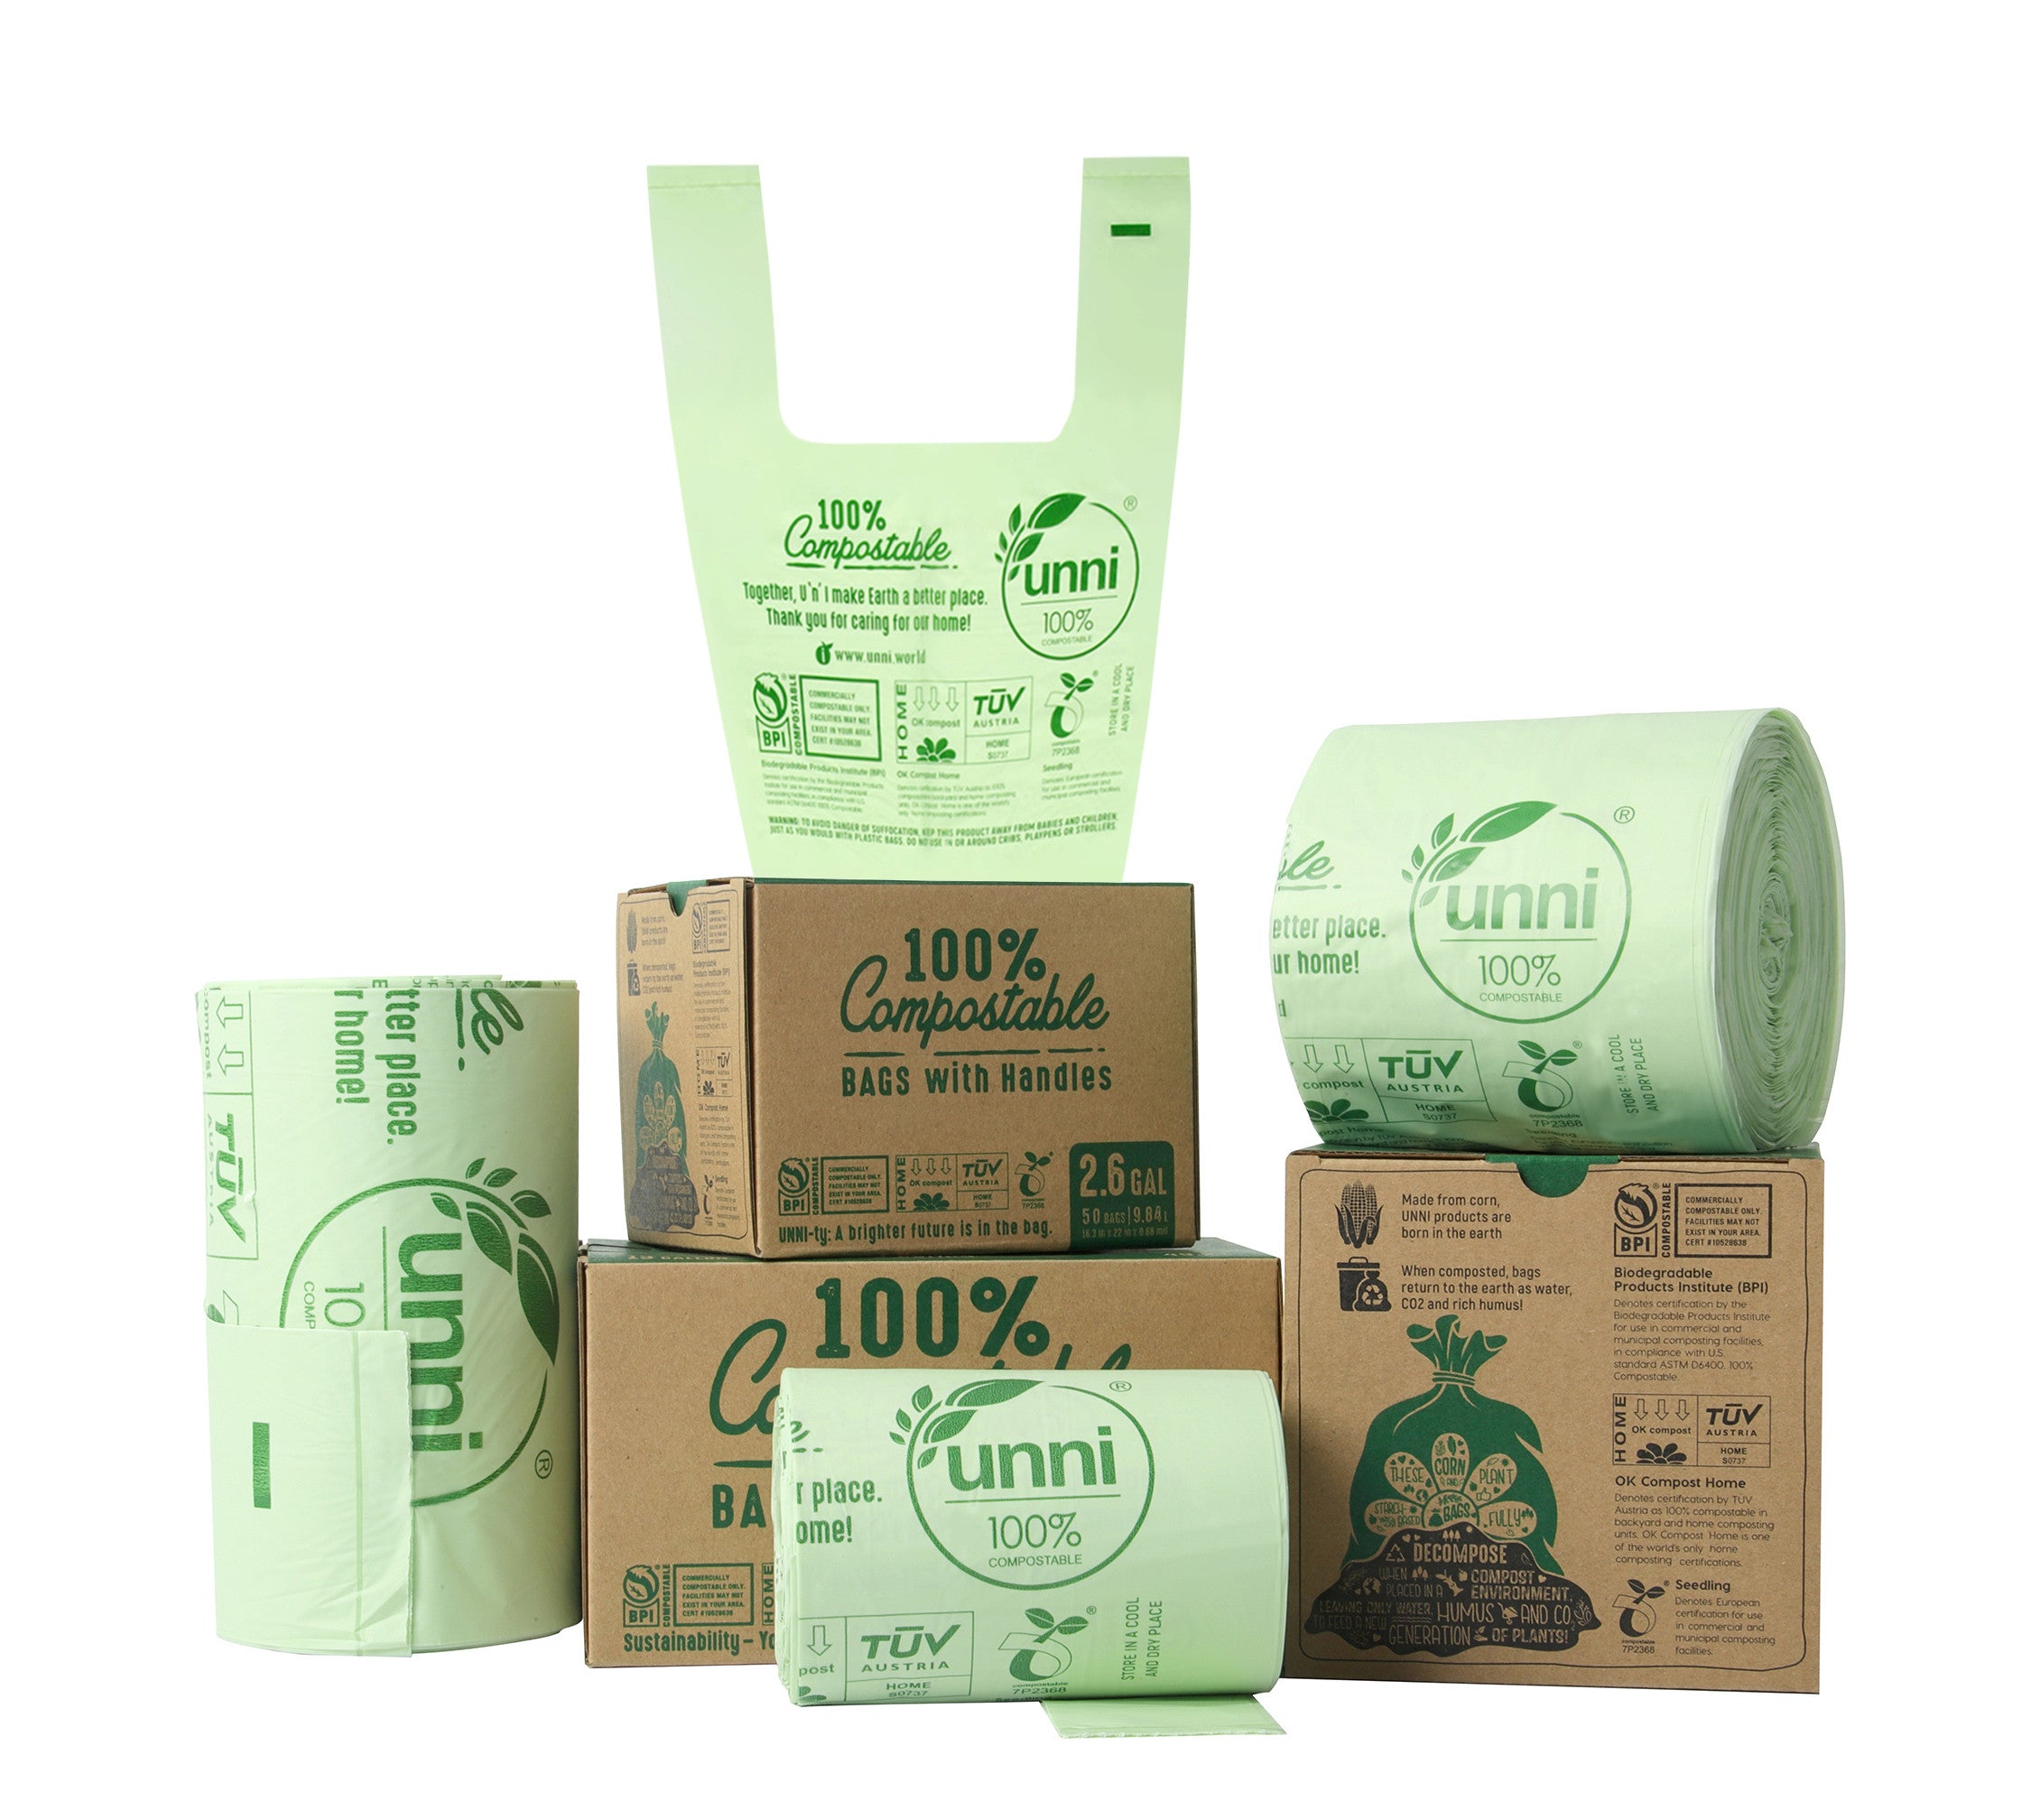 4 Gallon, 15 Liter, Compostable Bags with Handles